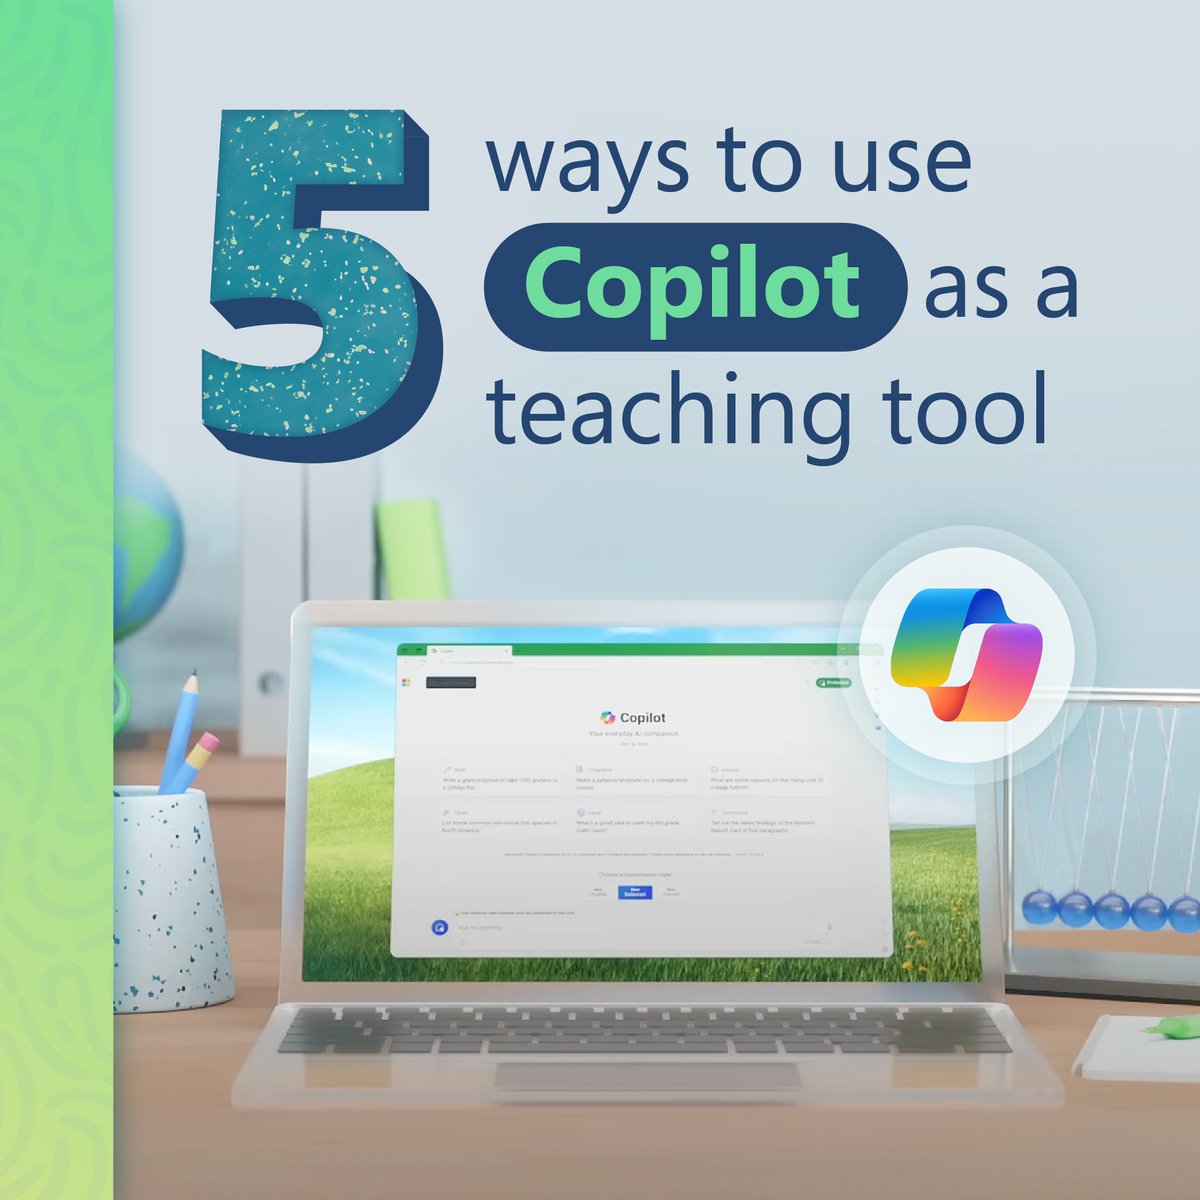 Microsoft Copilot is your new #AI assistant. Here are 5 ways to use this powerful tool in your classroom. See for yourself: msft.it/6014cNdUy